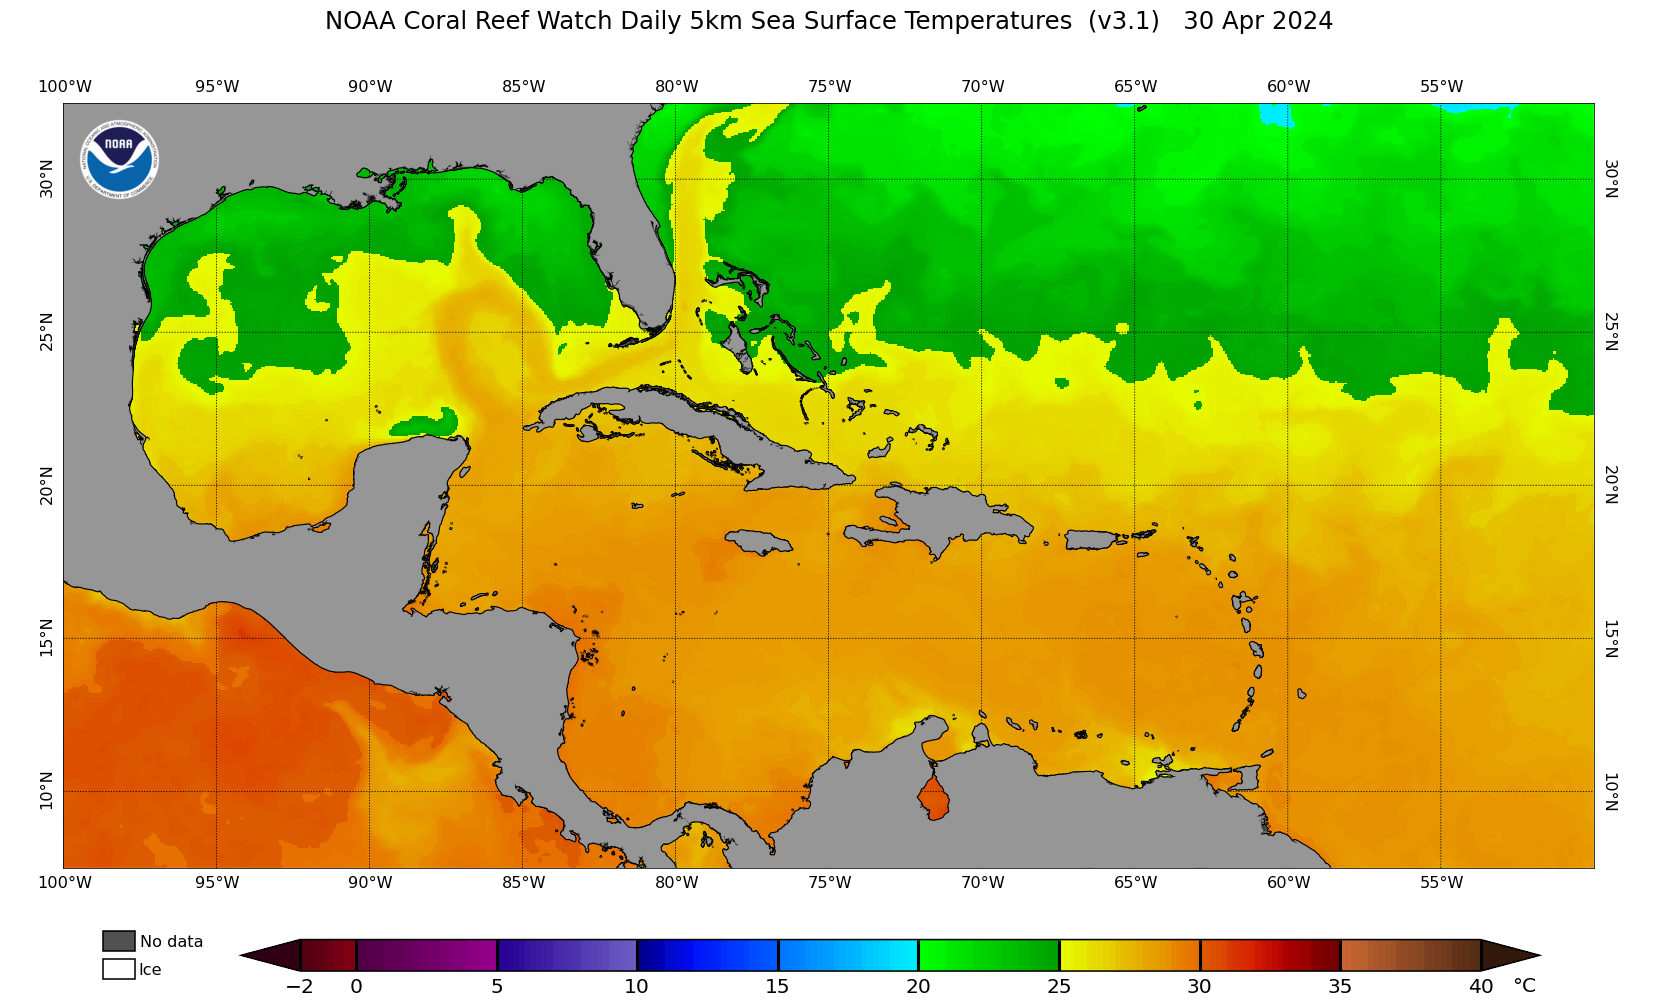 SST map - Sea Surface Temperature. Zone: Caribbean